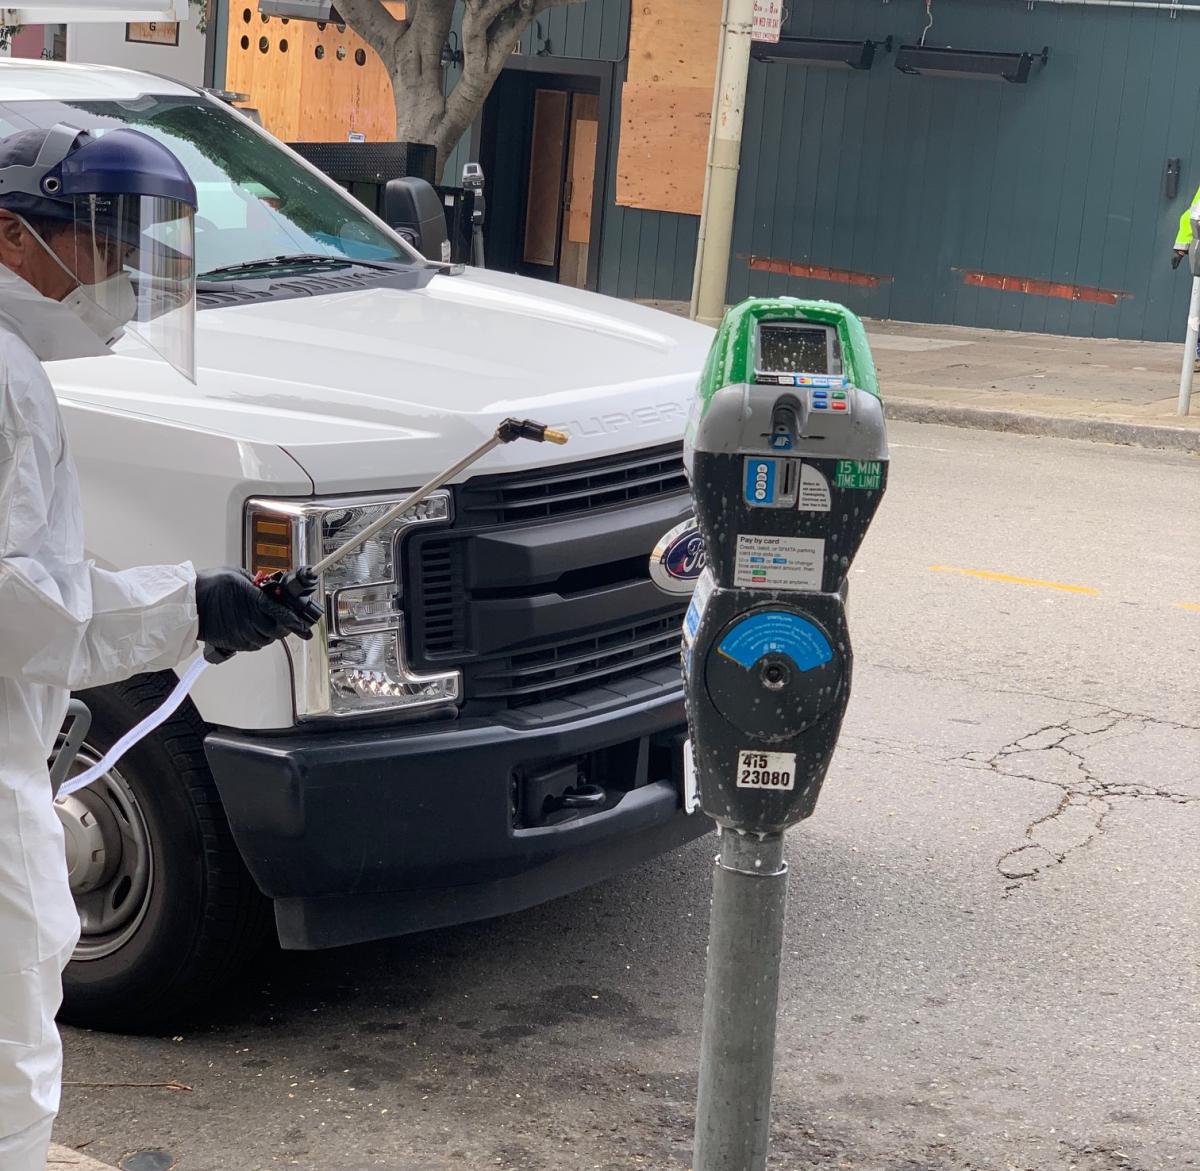 Parking Meter being sanitized by someone in a safety suit with visor